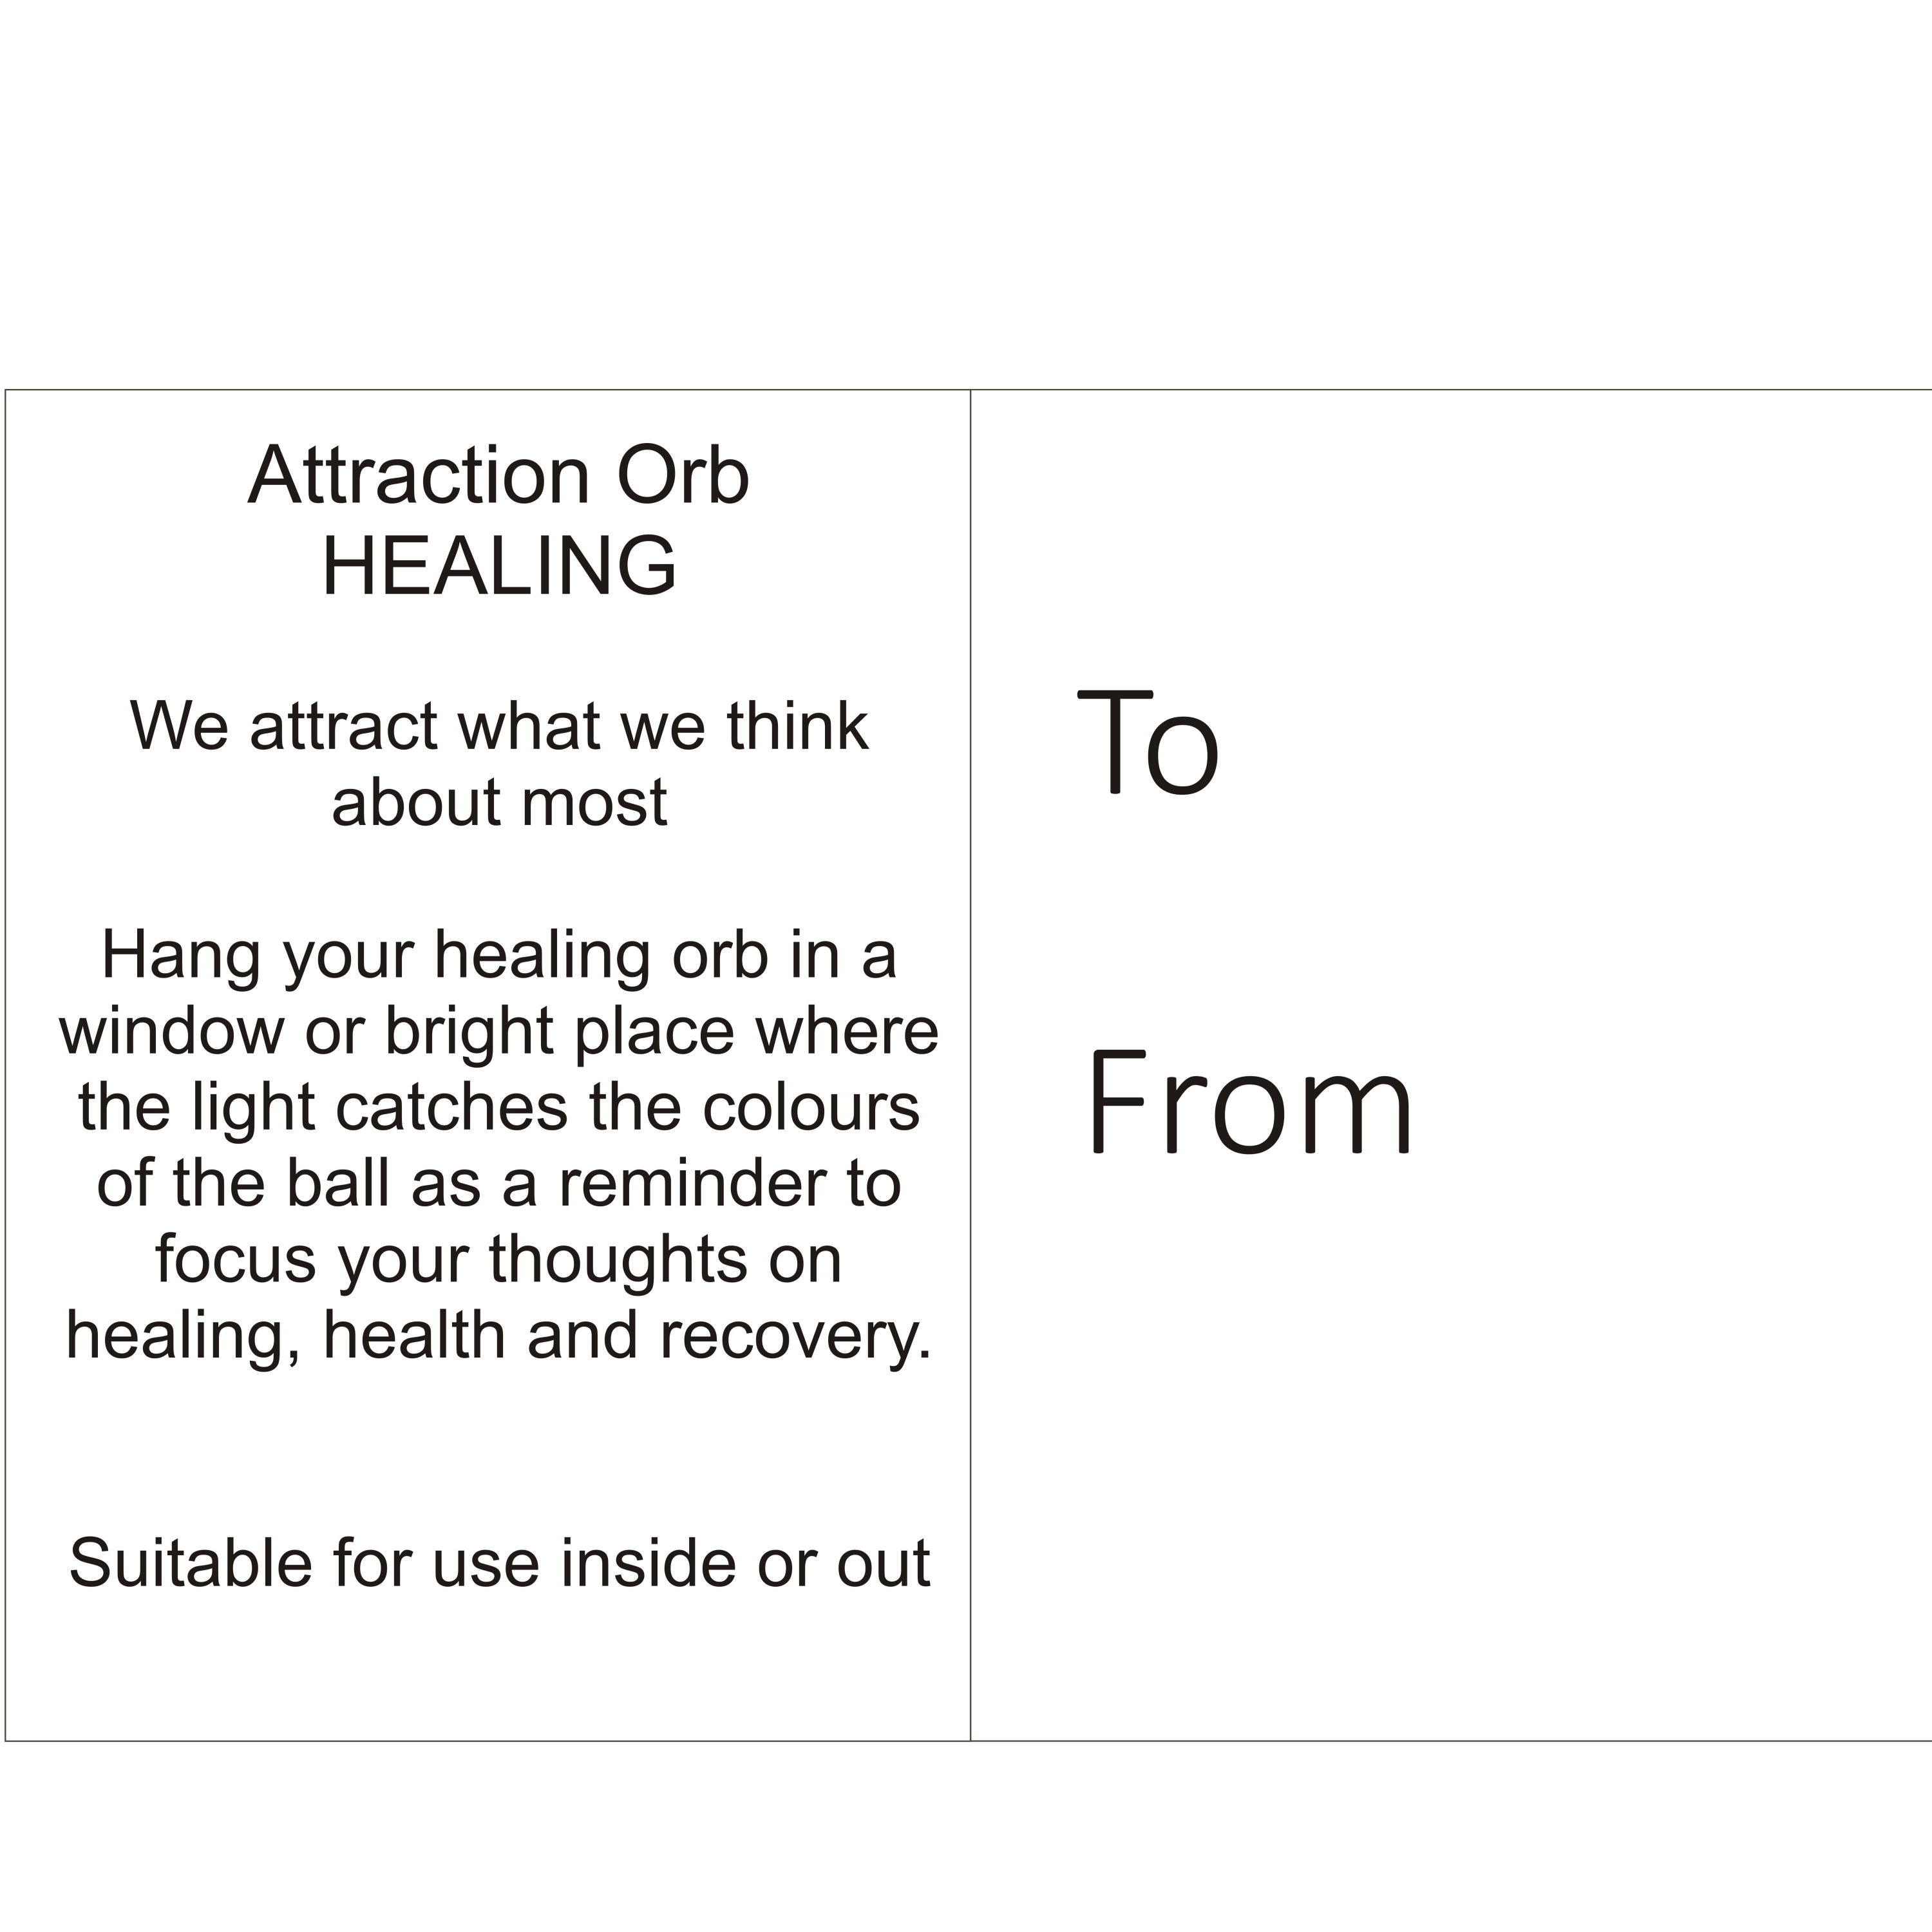 Attraction Orb - Healing